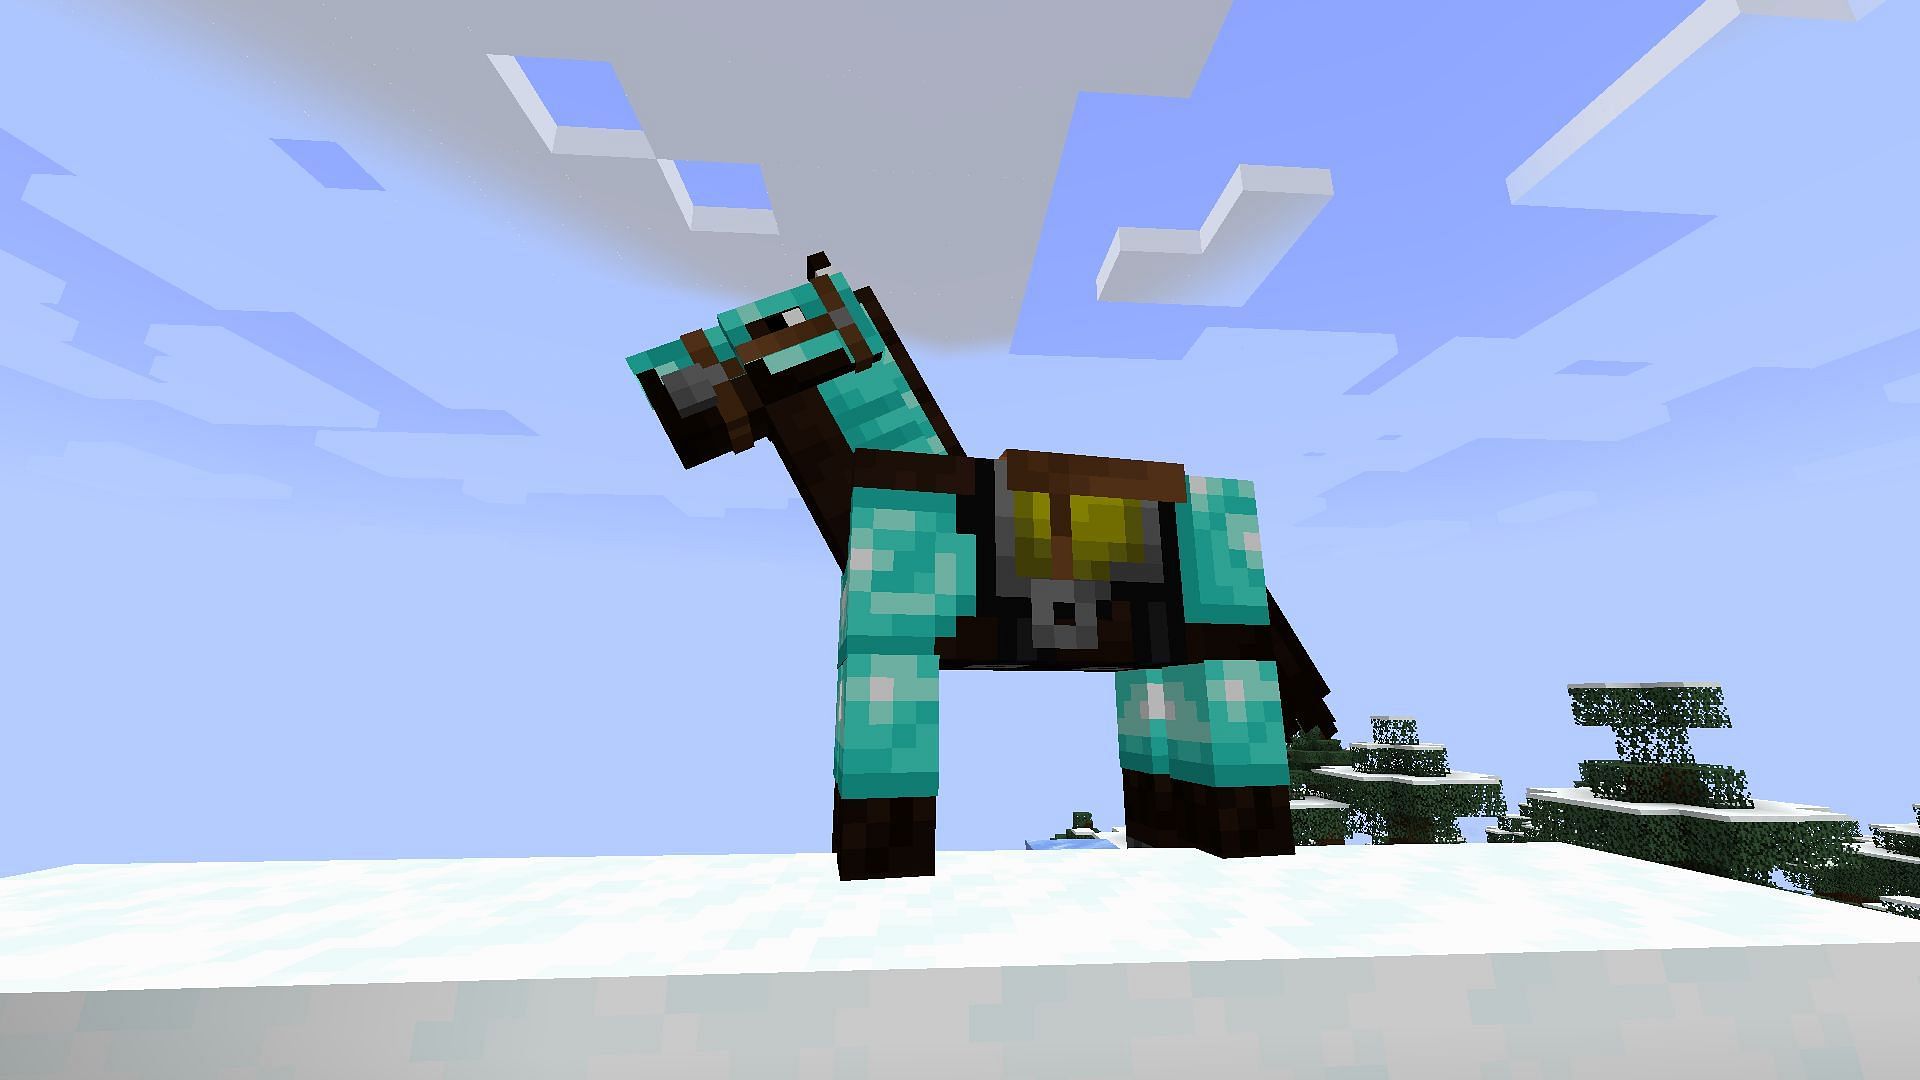 Players can breed horses to get a more quicker and stronger one in Minecraft (Image via Mojang)